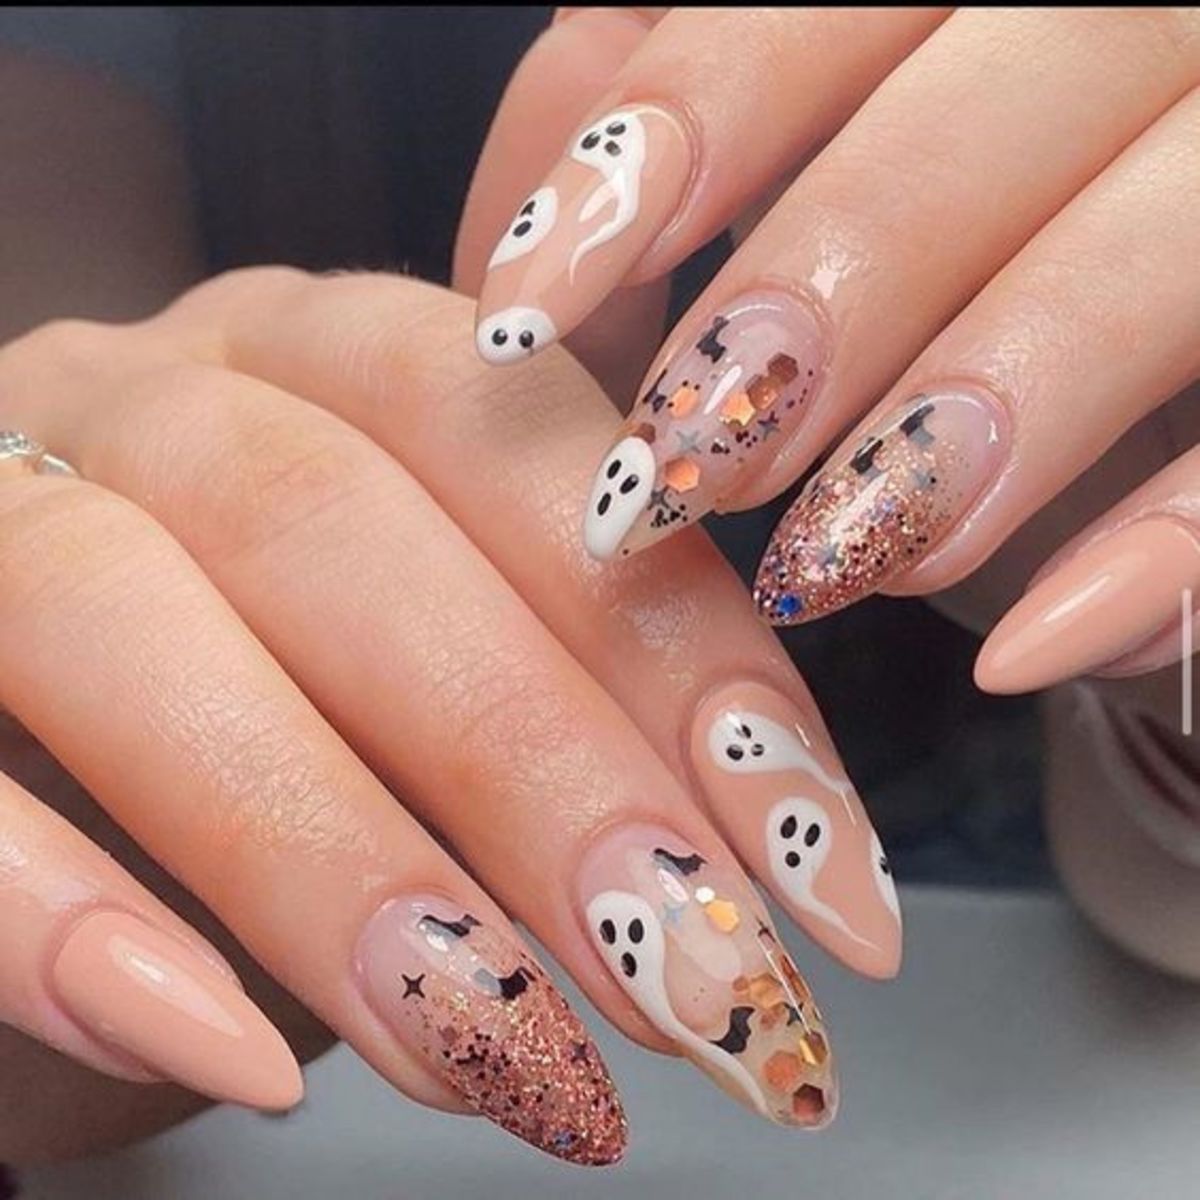 41 Cute Thanksgiving Nail Ideas for 2019 - StayGlam